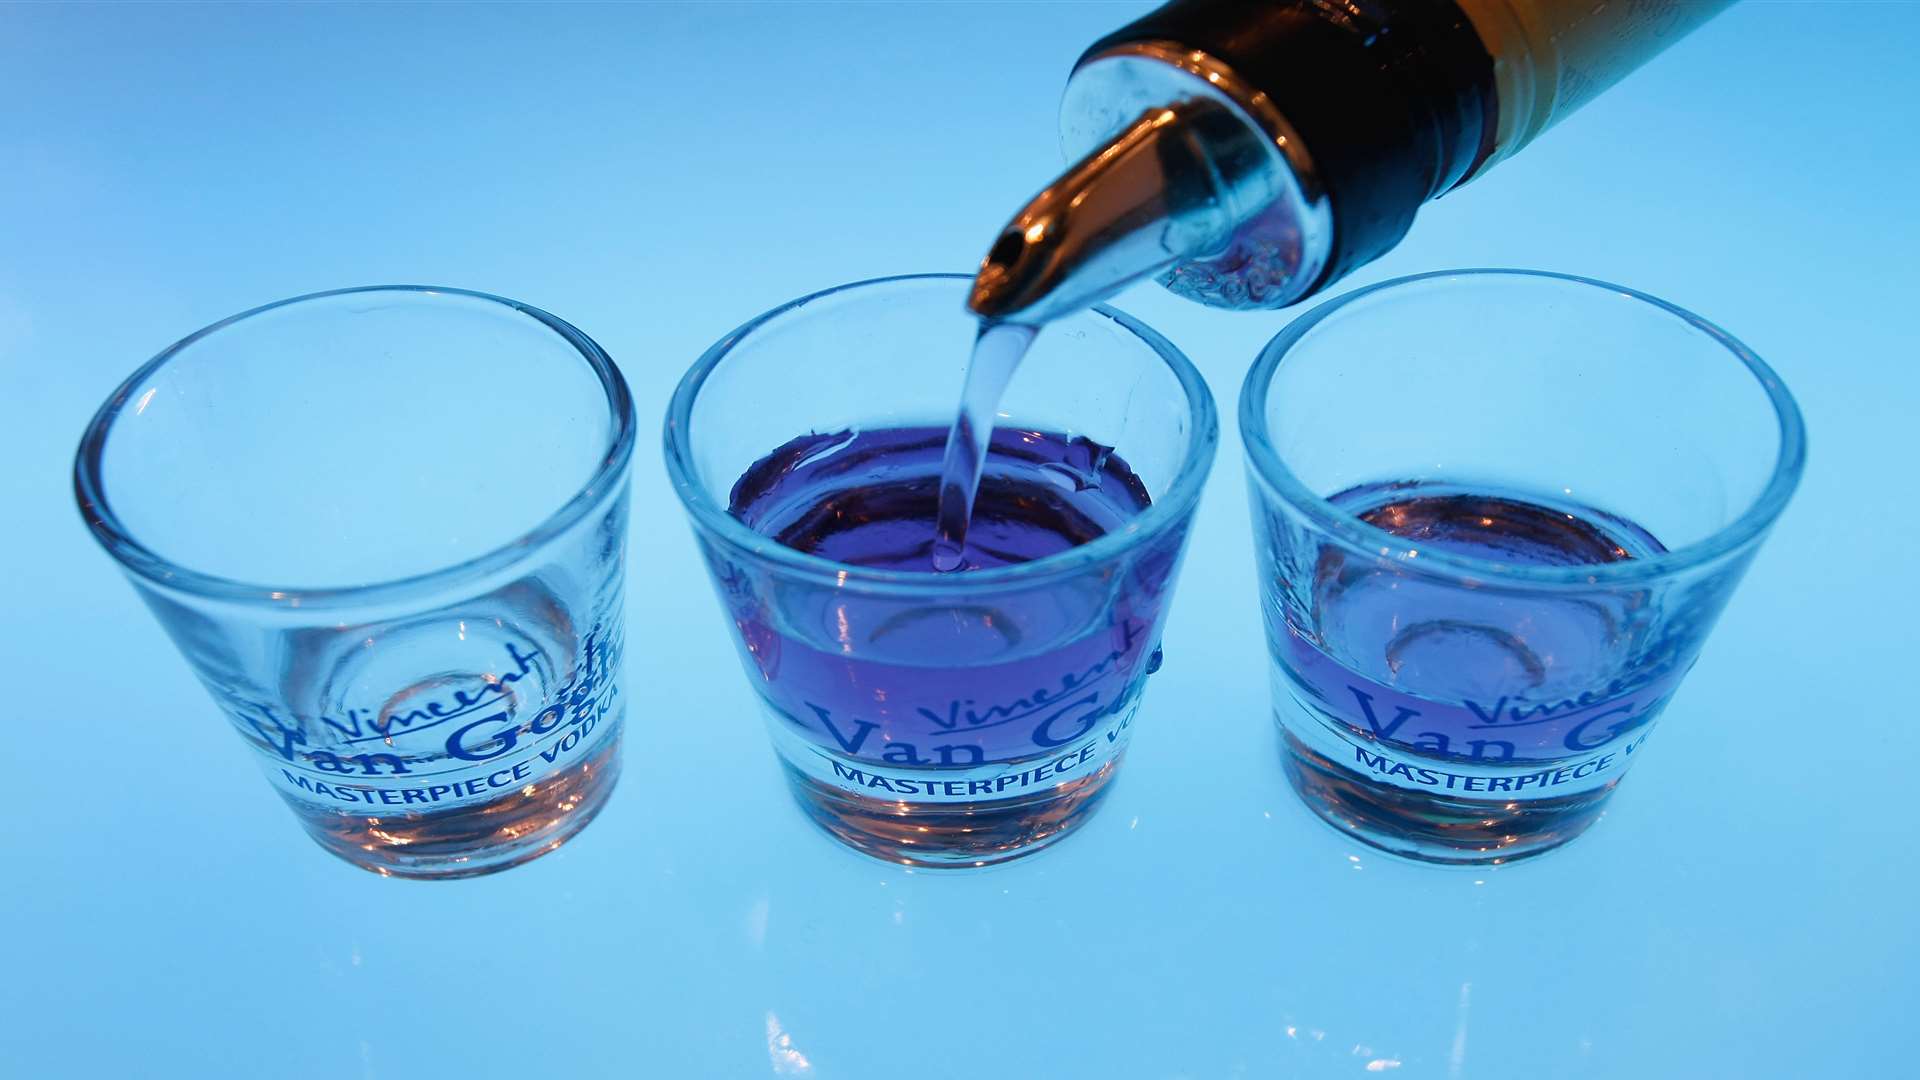 Shots being poured at a bar. Picture: David Silverman/Getty Images